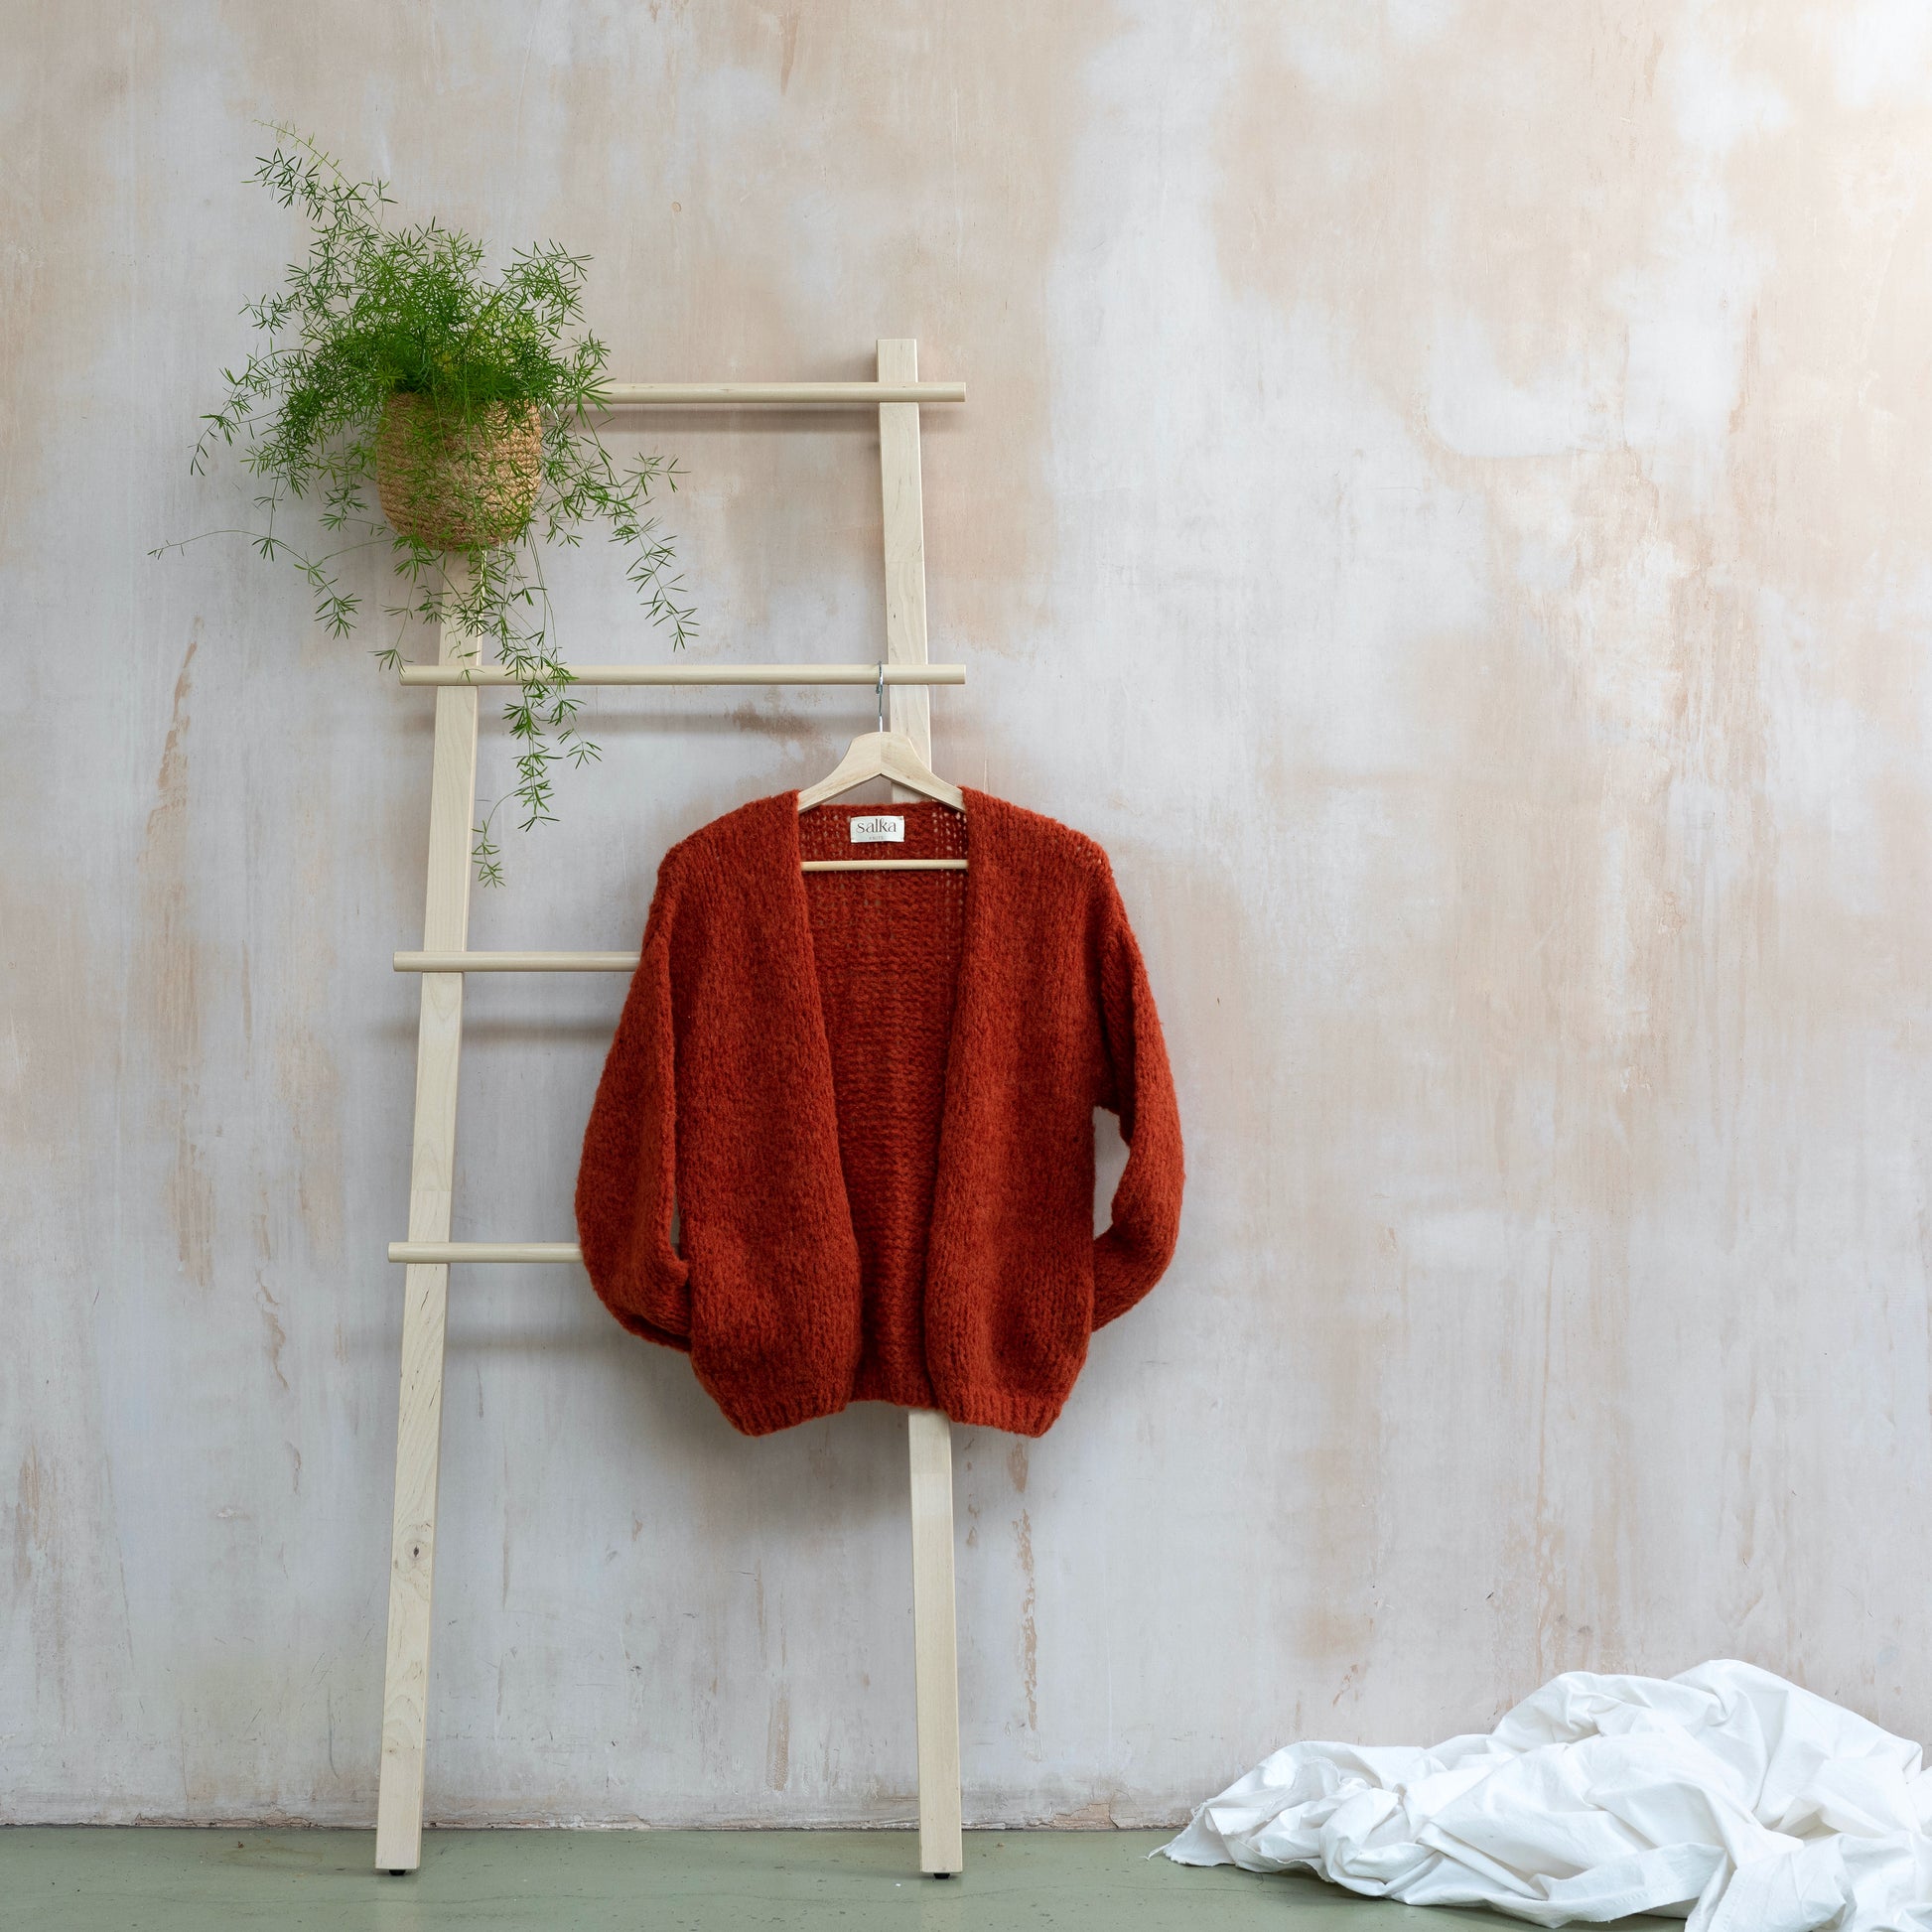 Orange coloured knitted alpaca wool cardigan hanging on wooden ladder. Super soft and cosy